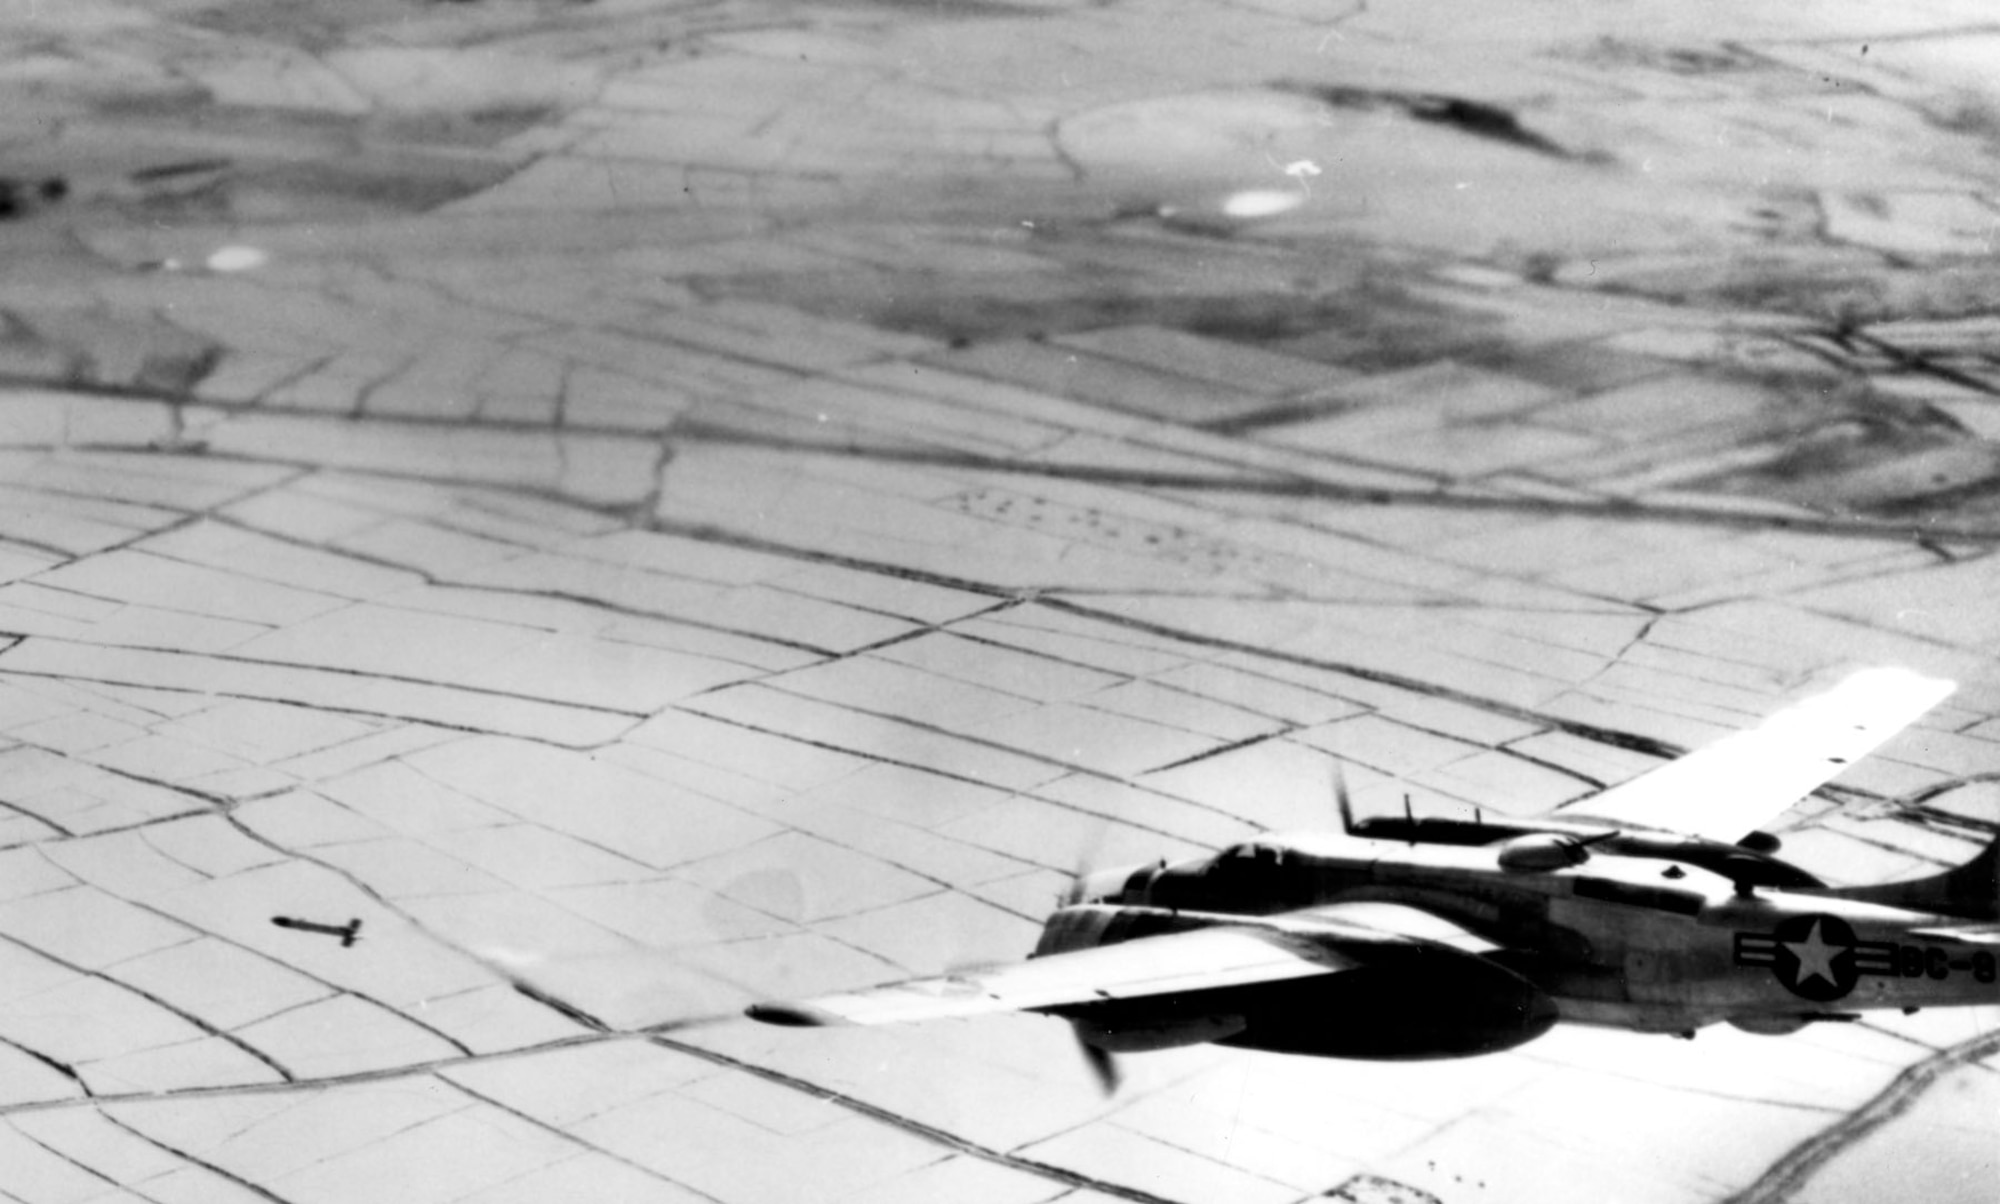 B-26 on an attack run fires one of its 5-inch rockets. In the top part of the photo are two rockets fired from another B-26. (U.S. Air Force photo)